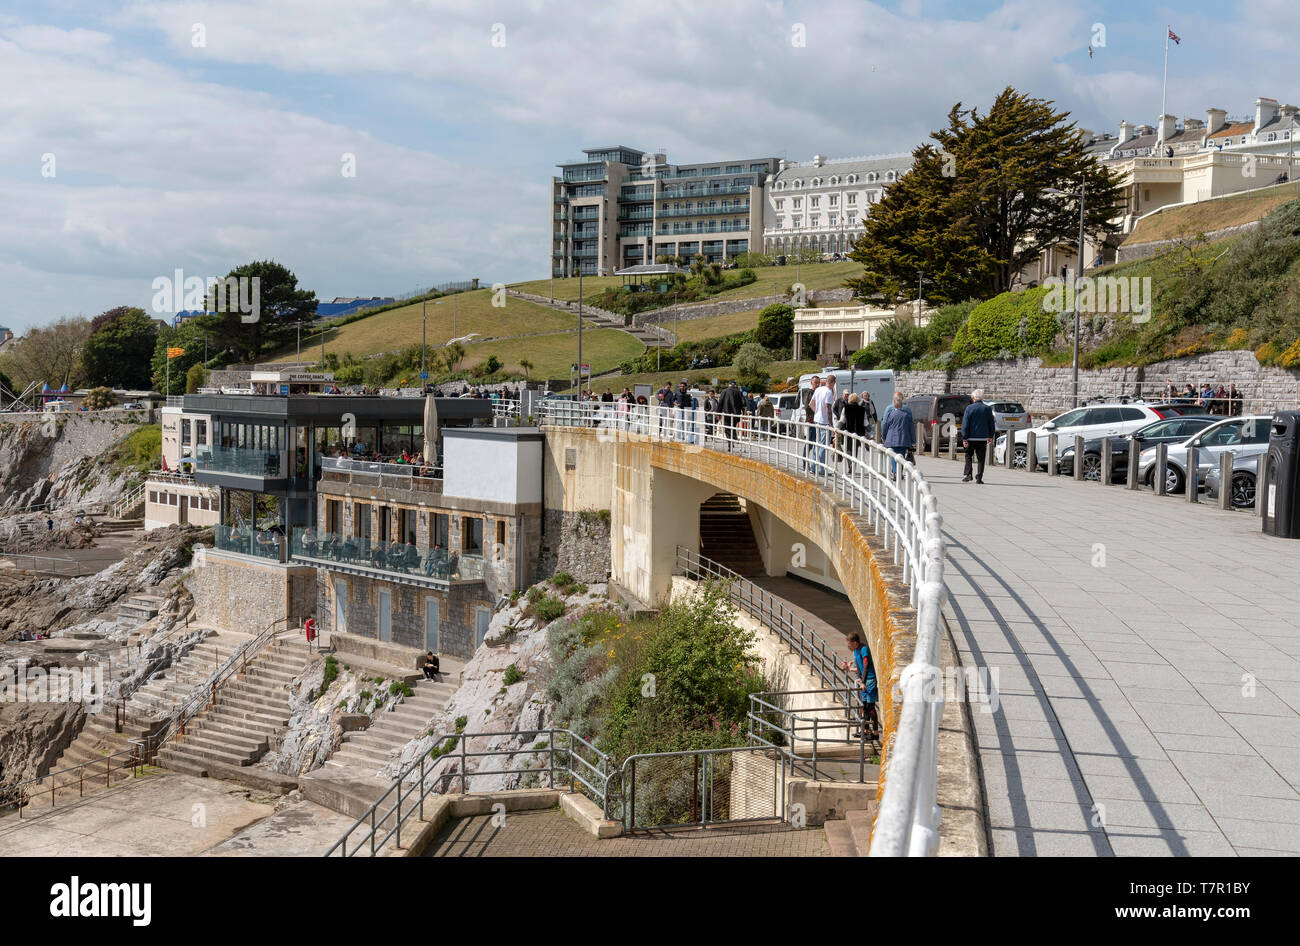 Plymouth, Devon, England, UK. May 2019. People walking on the waterfront with a view of property on The Hoe area of Plymouth and the lower Colonnade Stock Photo